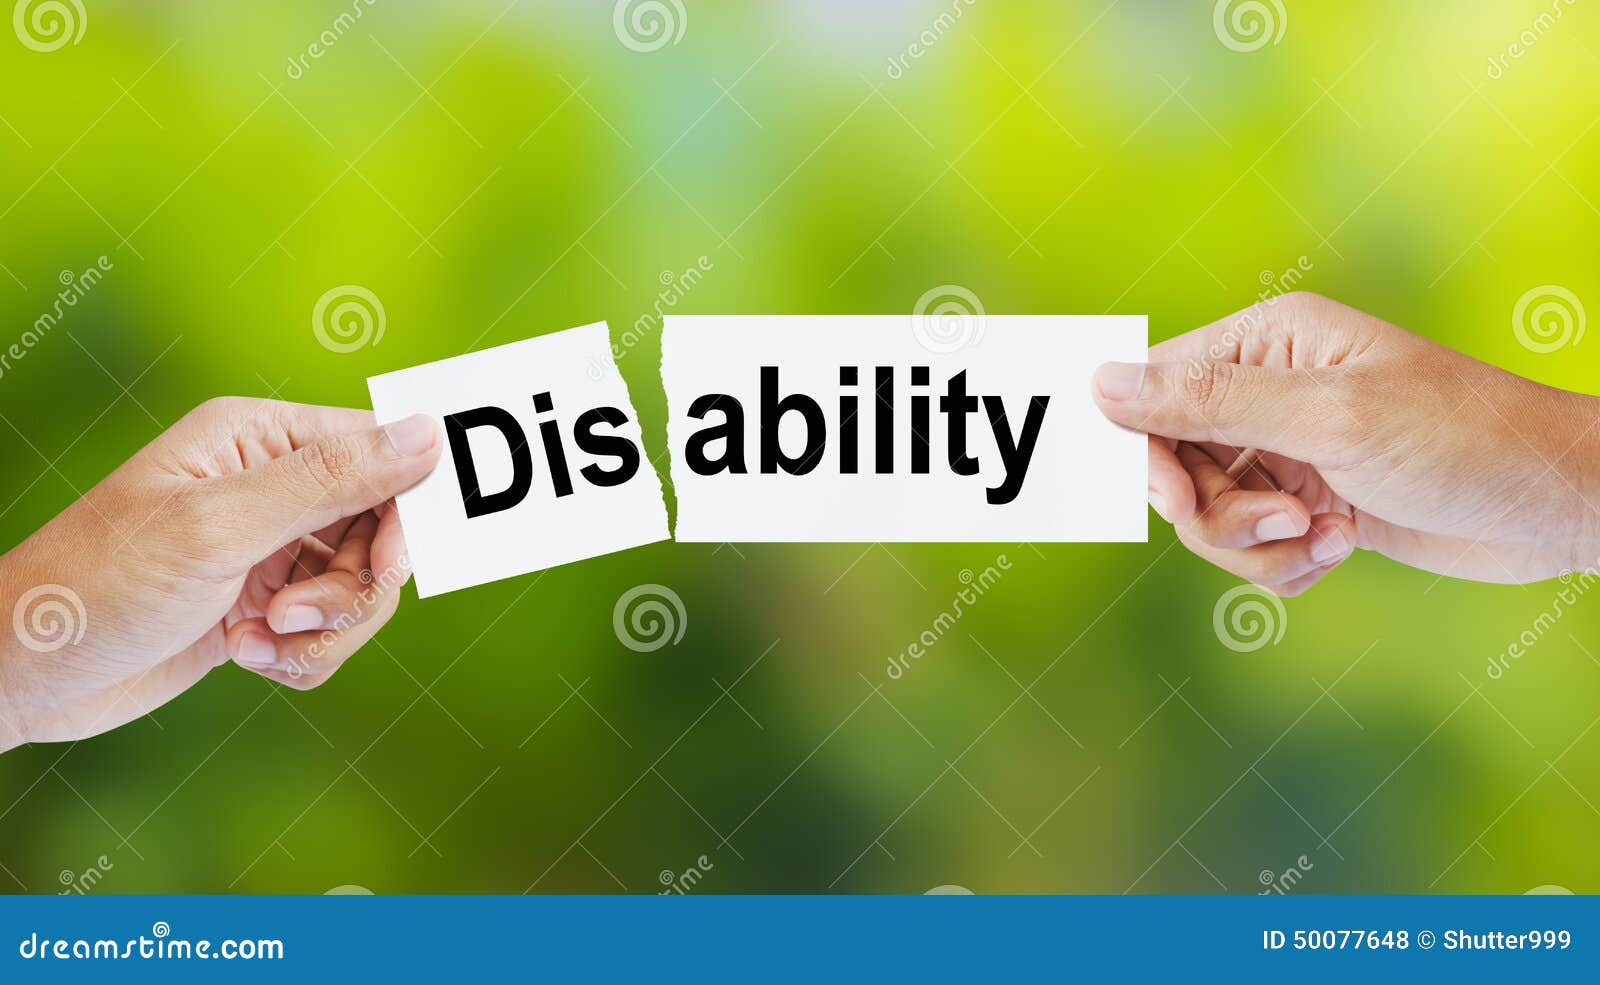 man tearing the word disability for ability